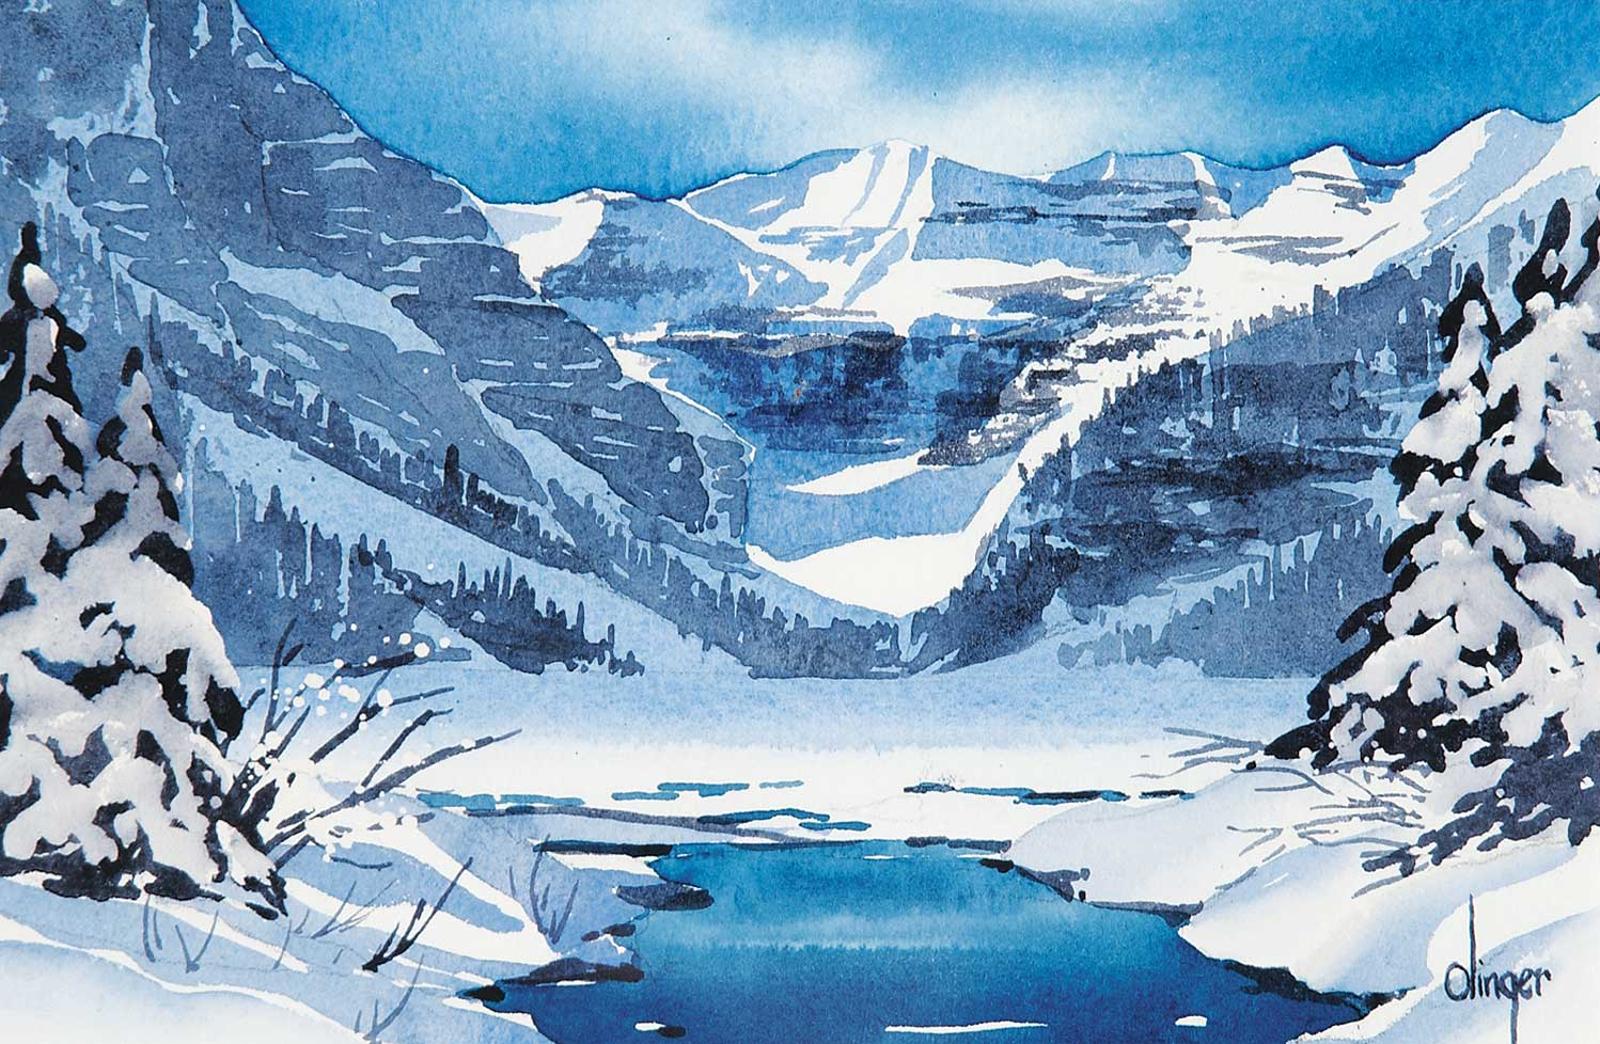 Louise Olinger - Untitled - Lake Louise in Winter